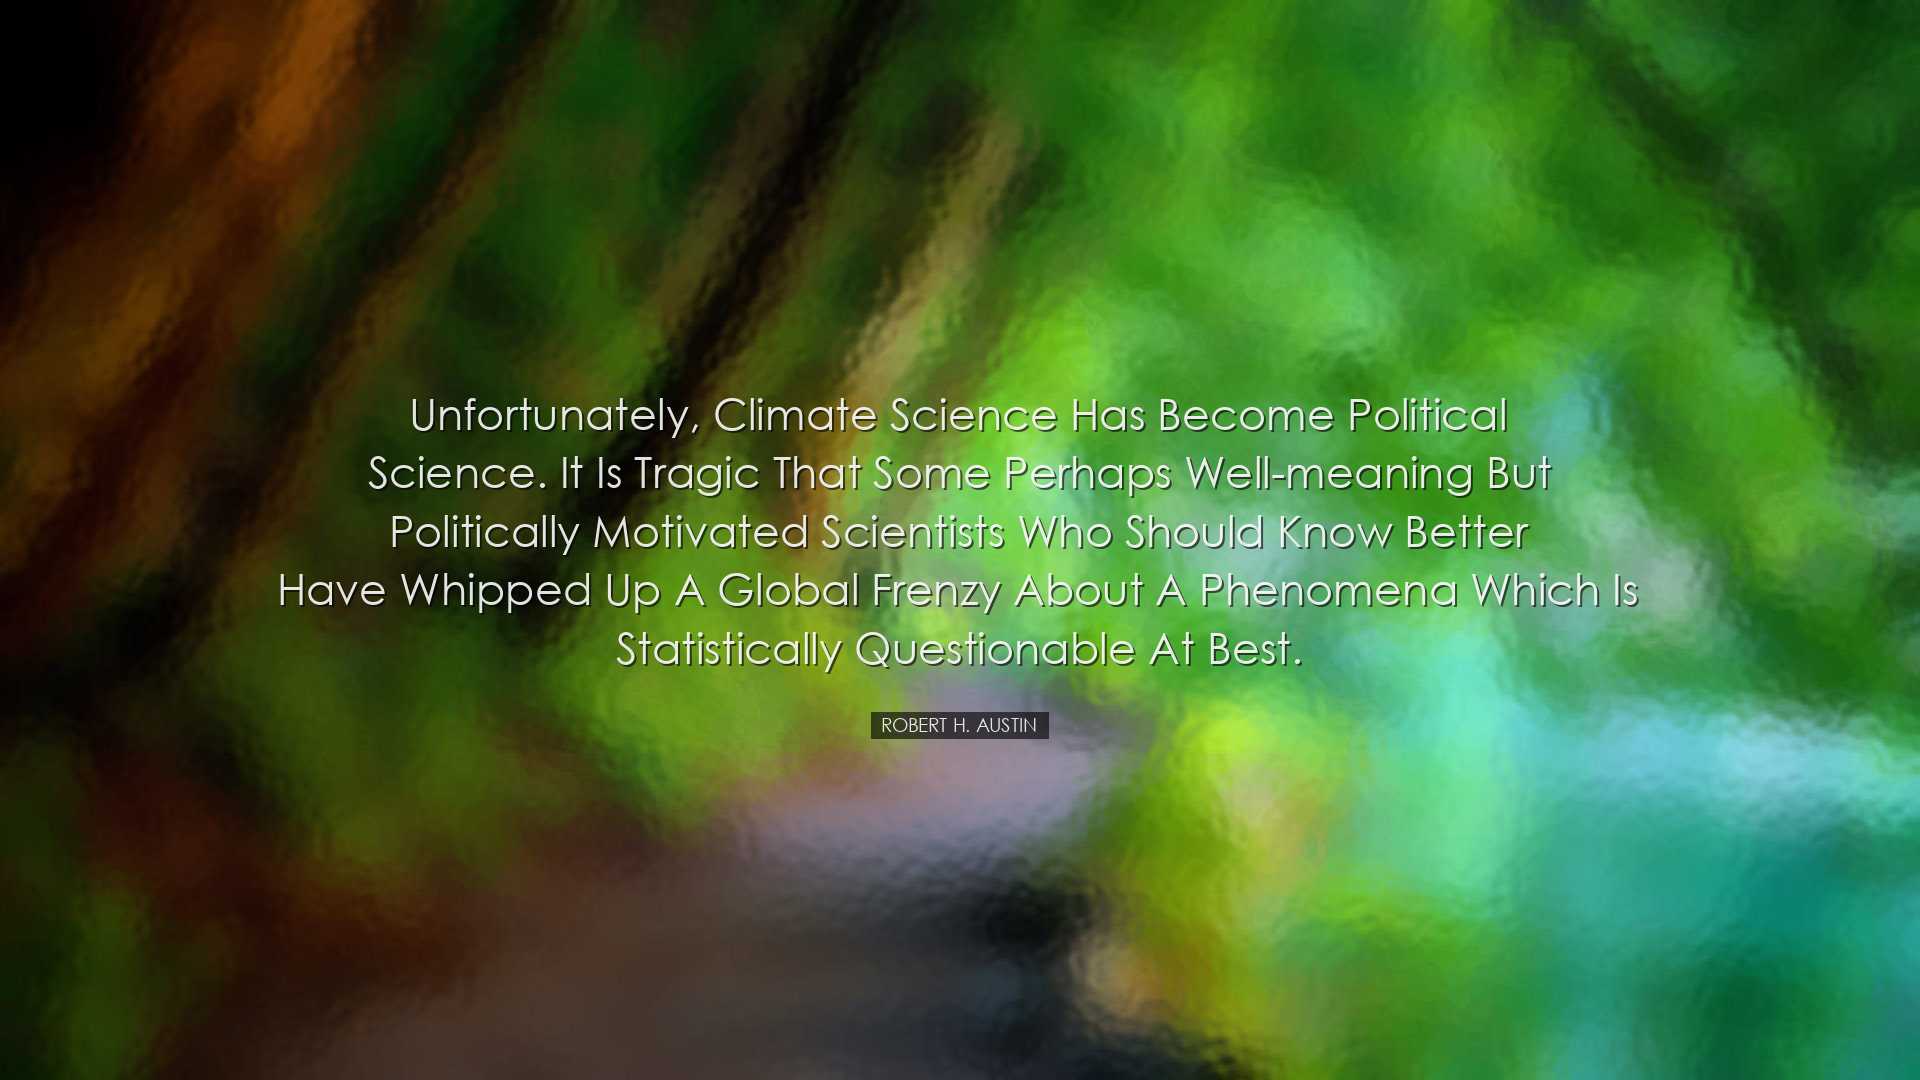 Unfortunately, Climate Science has become Political Science. It is